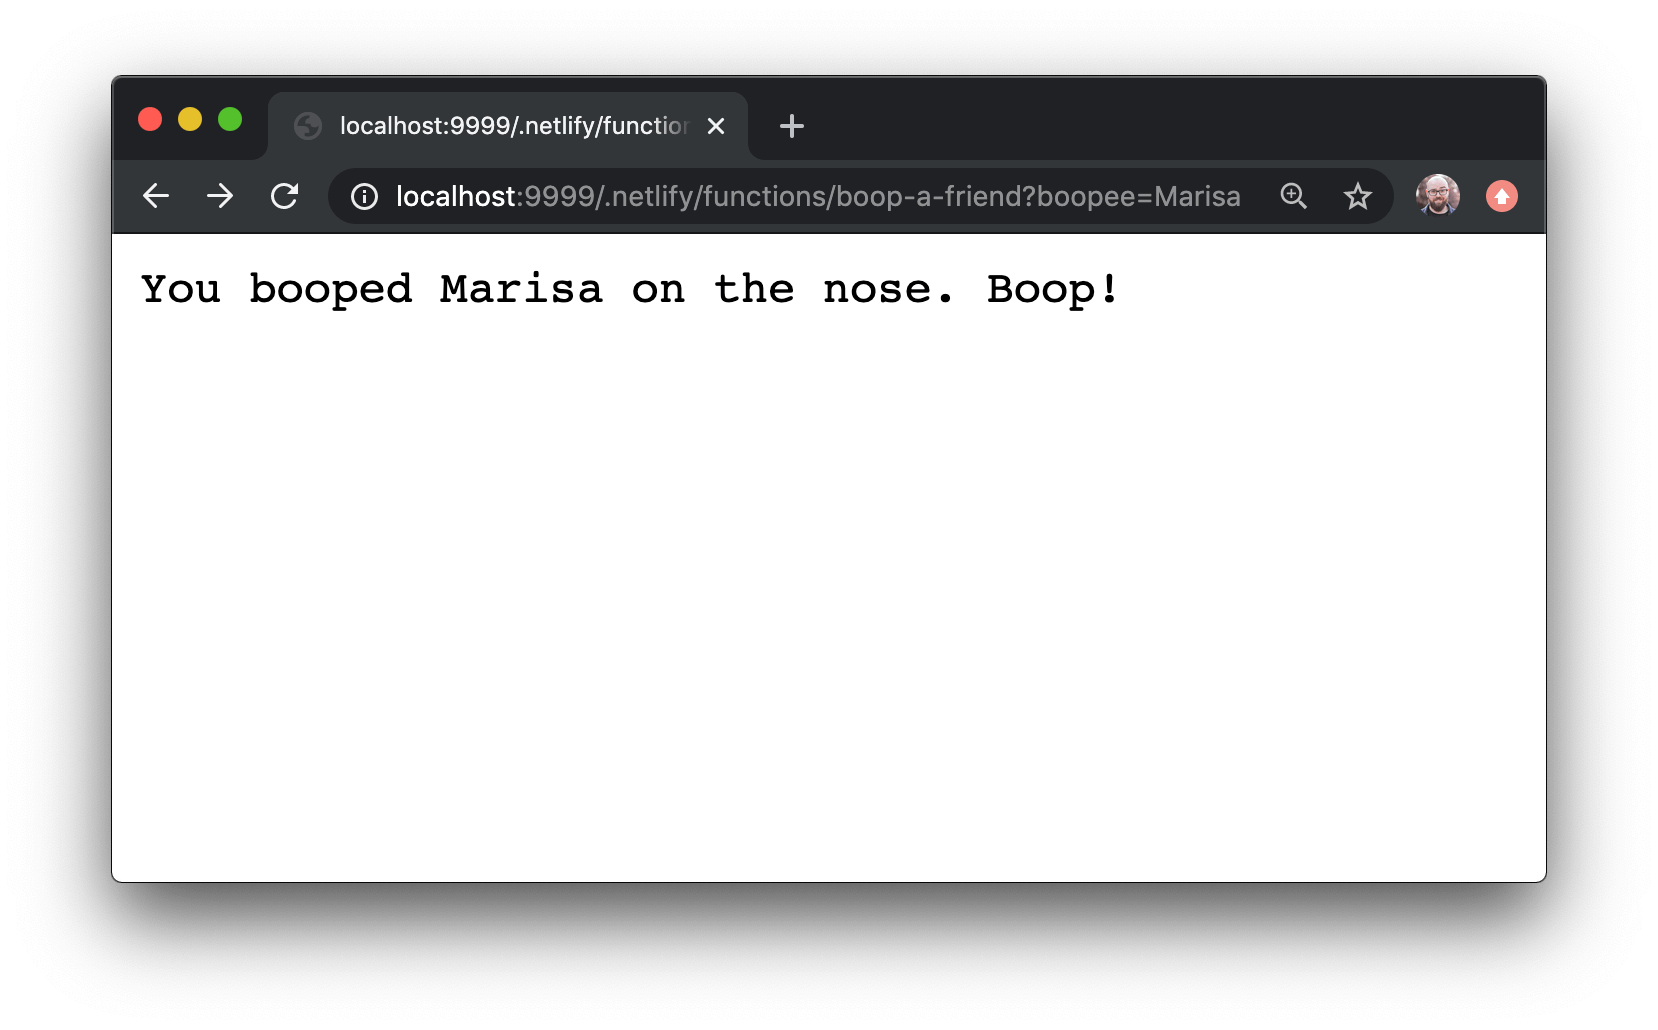 Browser showing output with a query parameter: “You booped Marisa on the nose. Boop!”